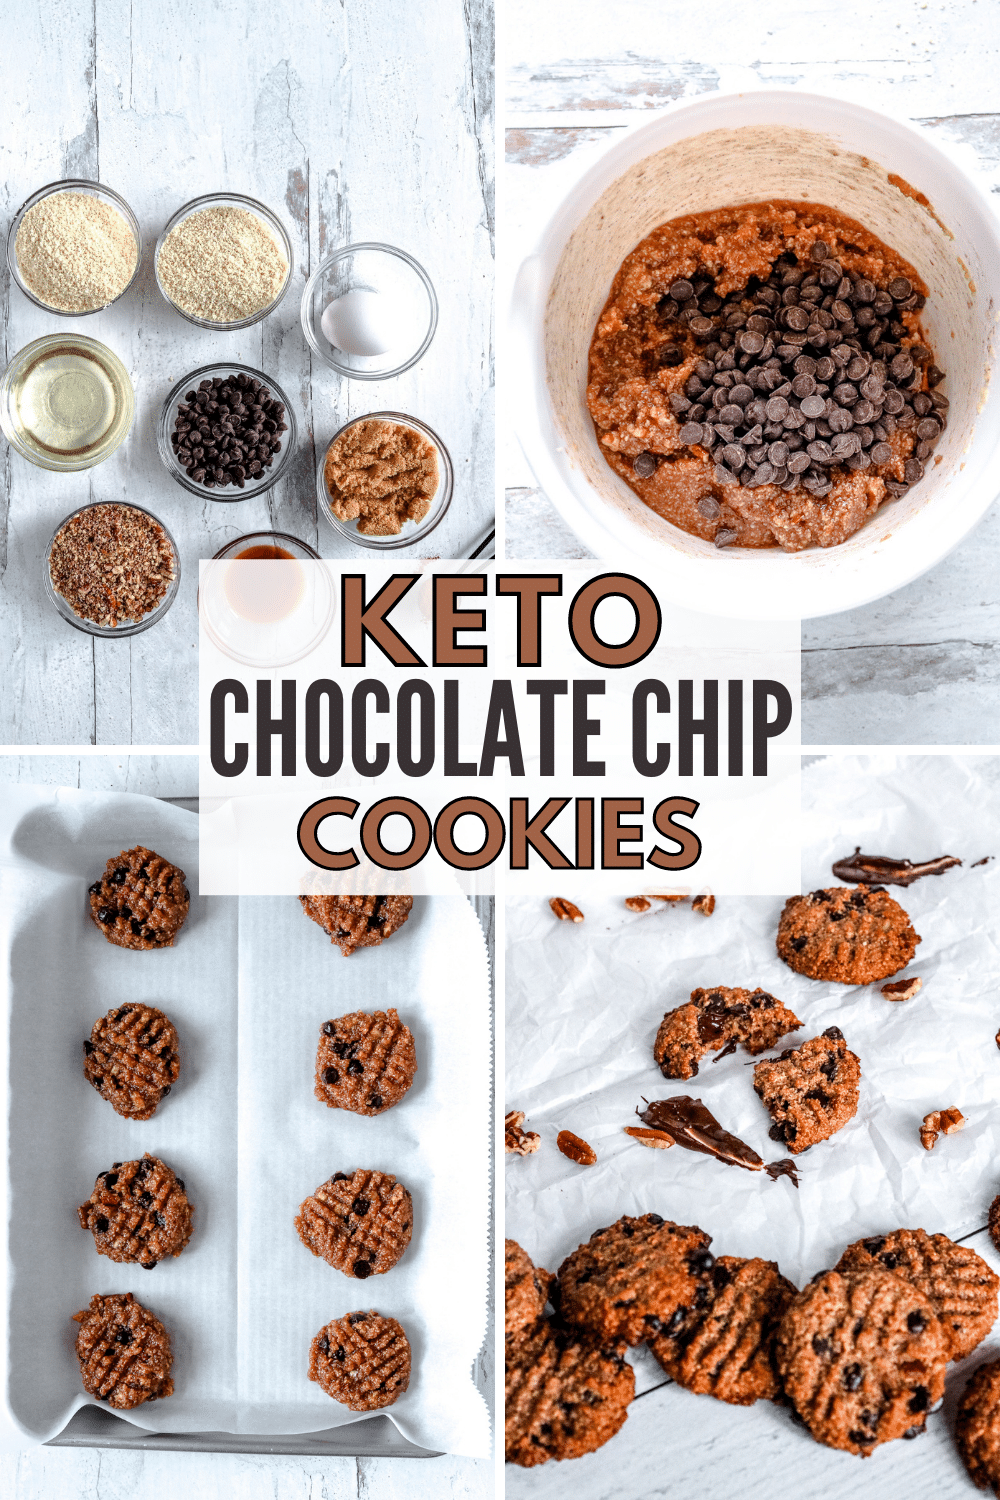 This Keto Chocolate Chip Cookies recipe is delicious and nutritious. These keto-friendly cookies are also gluten-free and sugar-free. #keto #chocolatechipcookies #recipe #glutenfree #sugarfree via @wondermomwannab